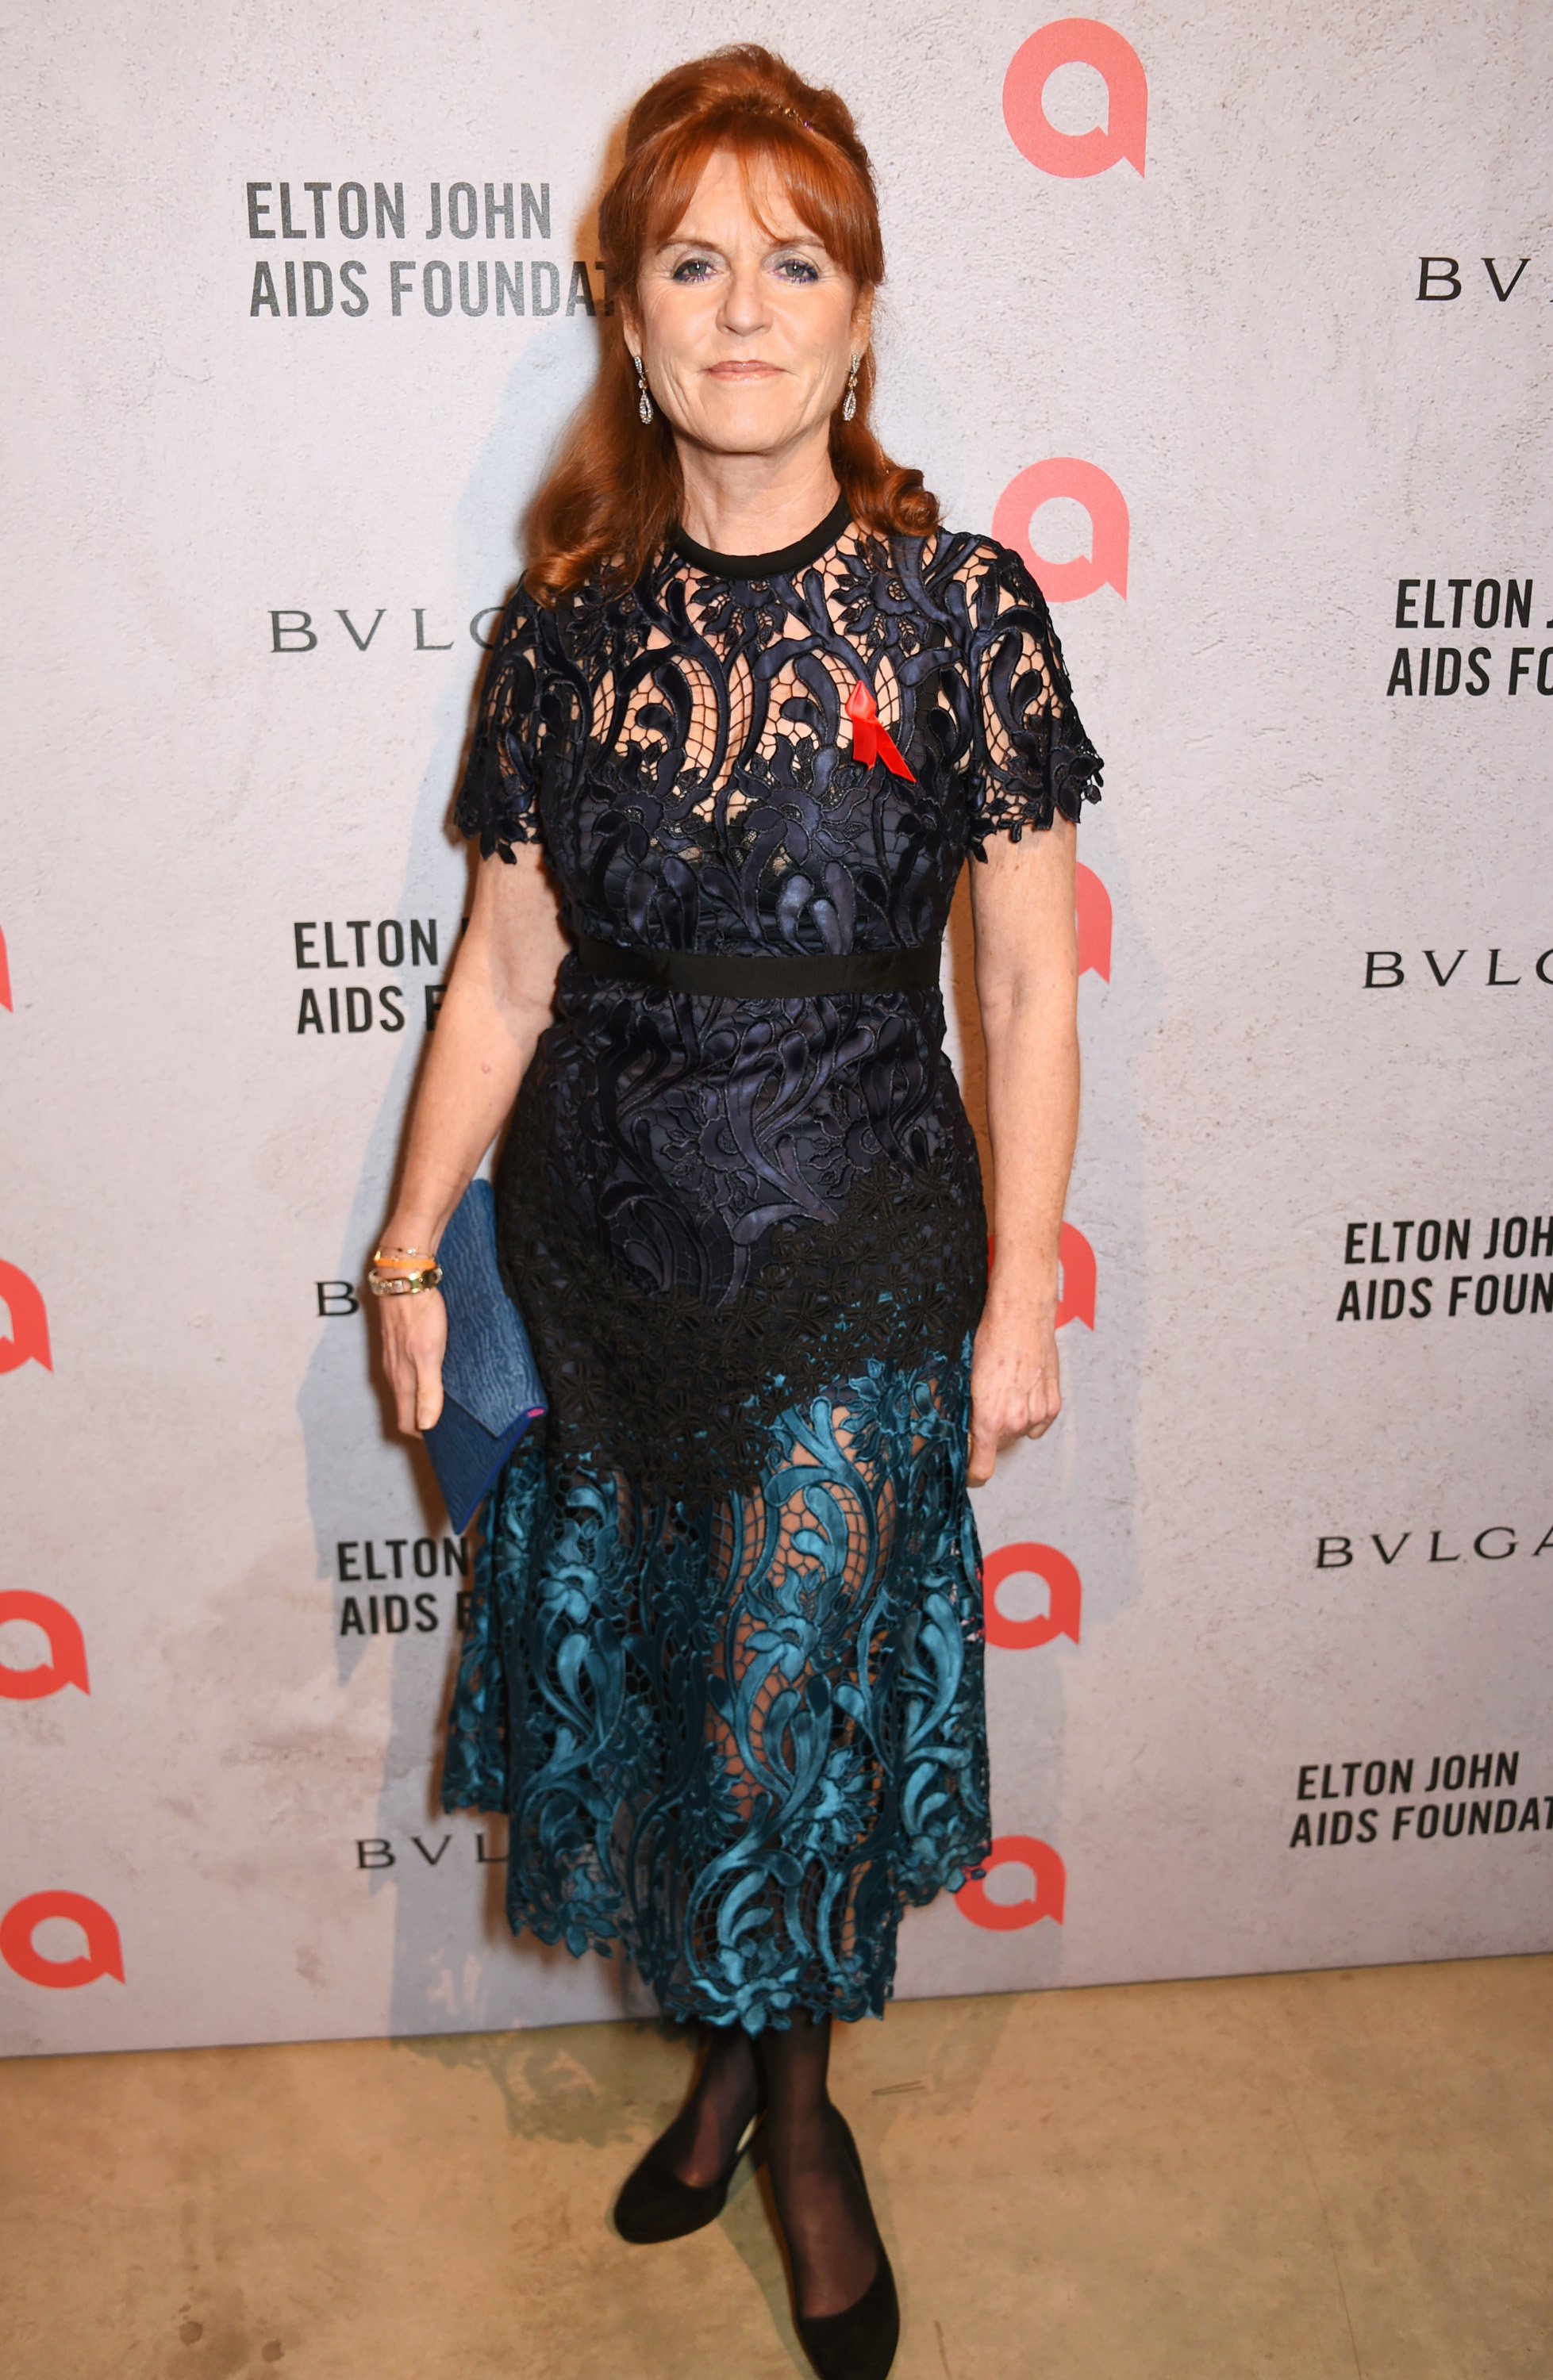 Sarah Ferguson, ex-wife of Prince Andrew, at the 20th Annual Elton John Aids Foundation Academy Awards Viewing Party| Photo: Getty Images